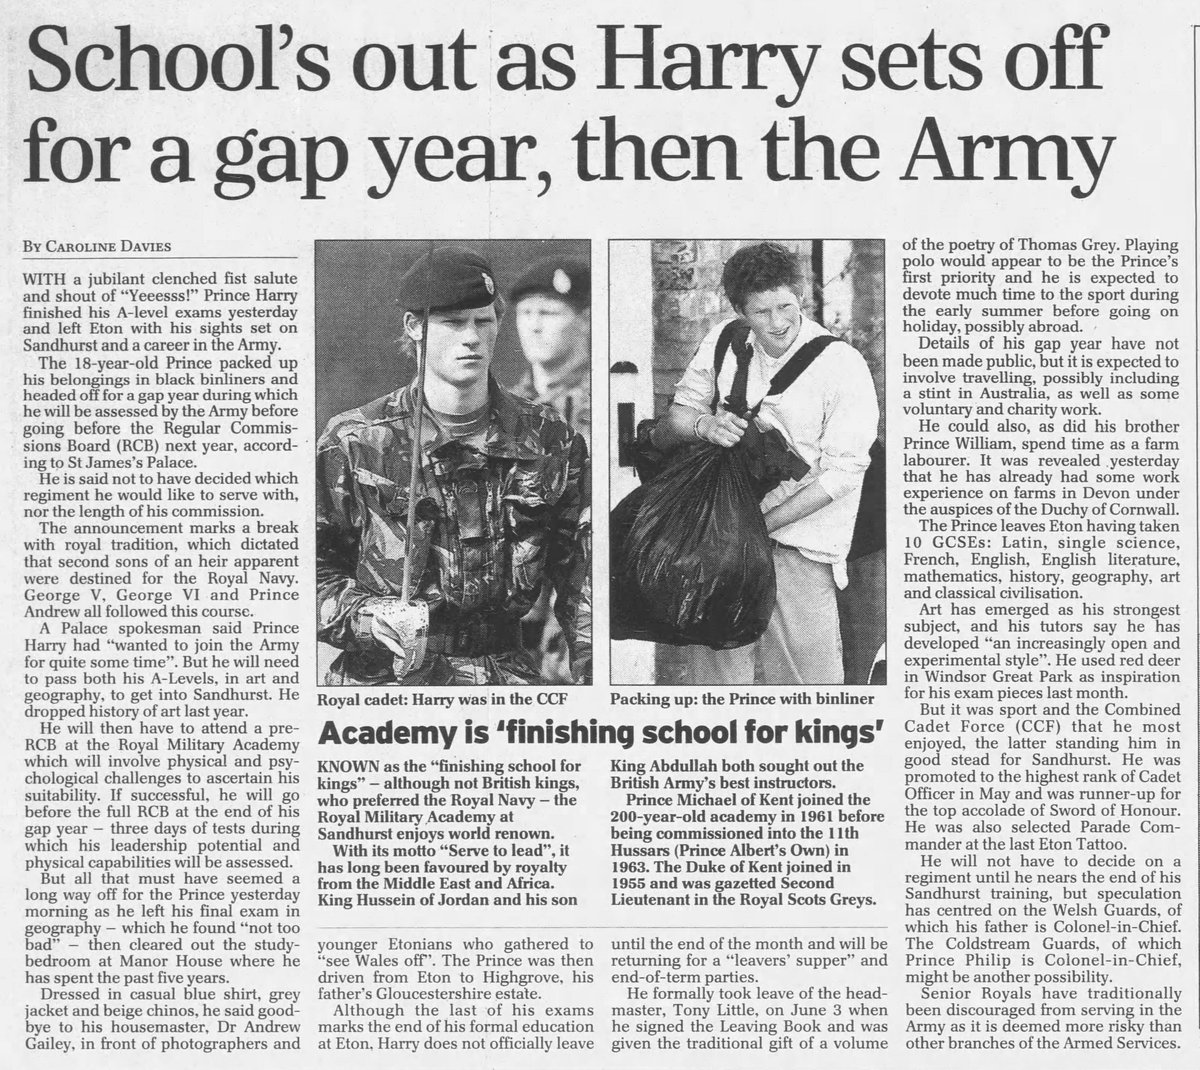 Senior #Royals have traditionally been discouraged from serving in the Army as it is deemed more risky than other branches of the Armed Services. (Jun 12, 2003) #Sandhurst #ServeToLead #PrinceHarryLivingLegend